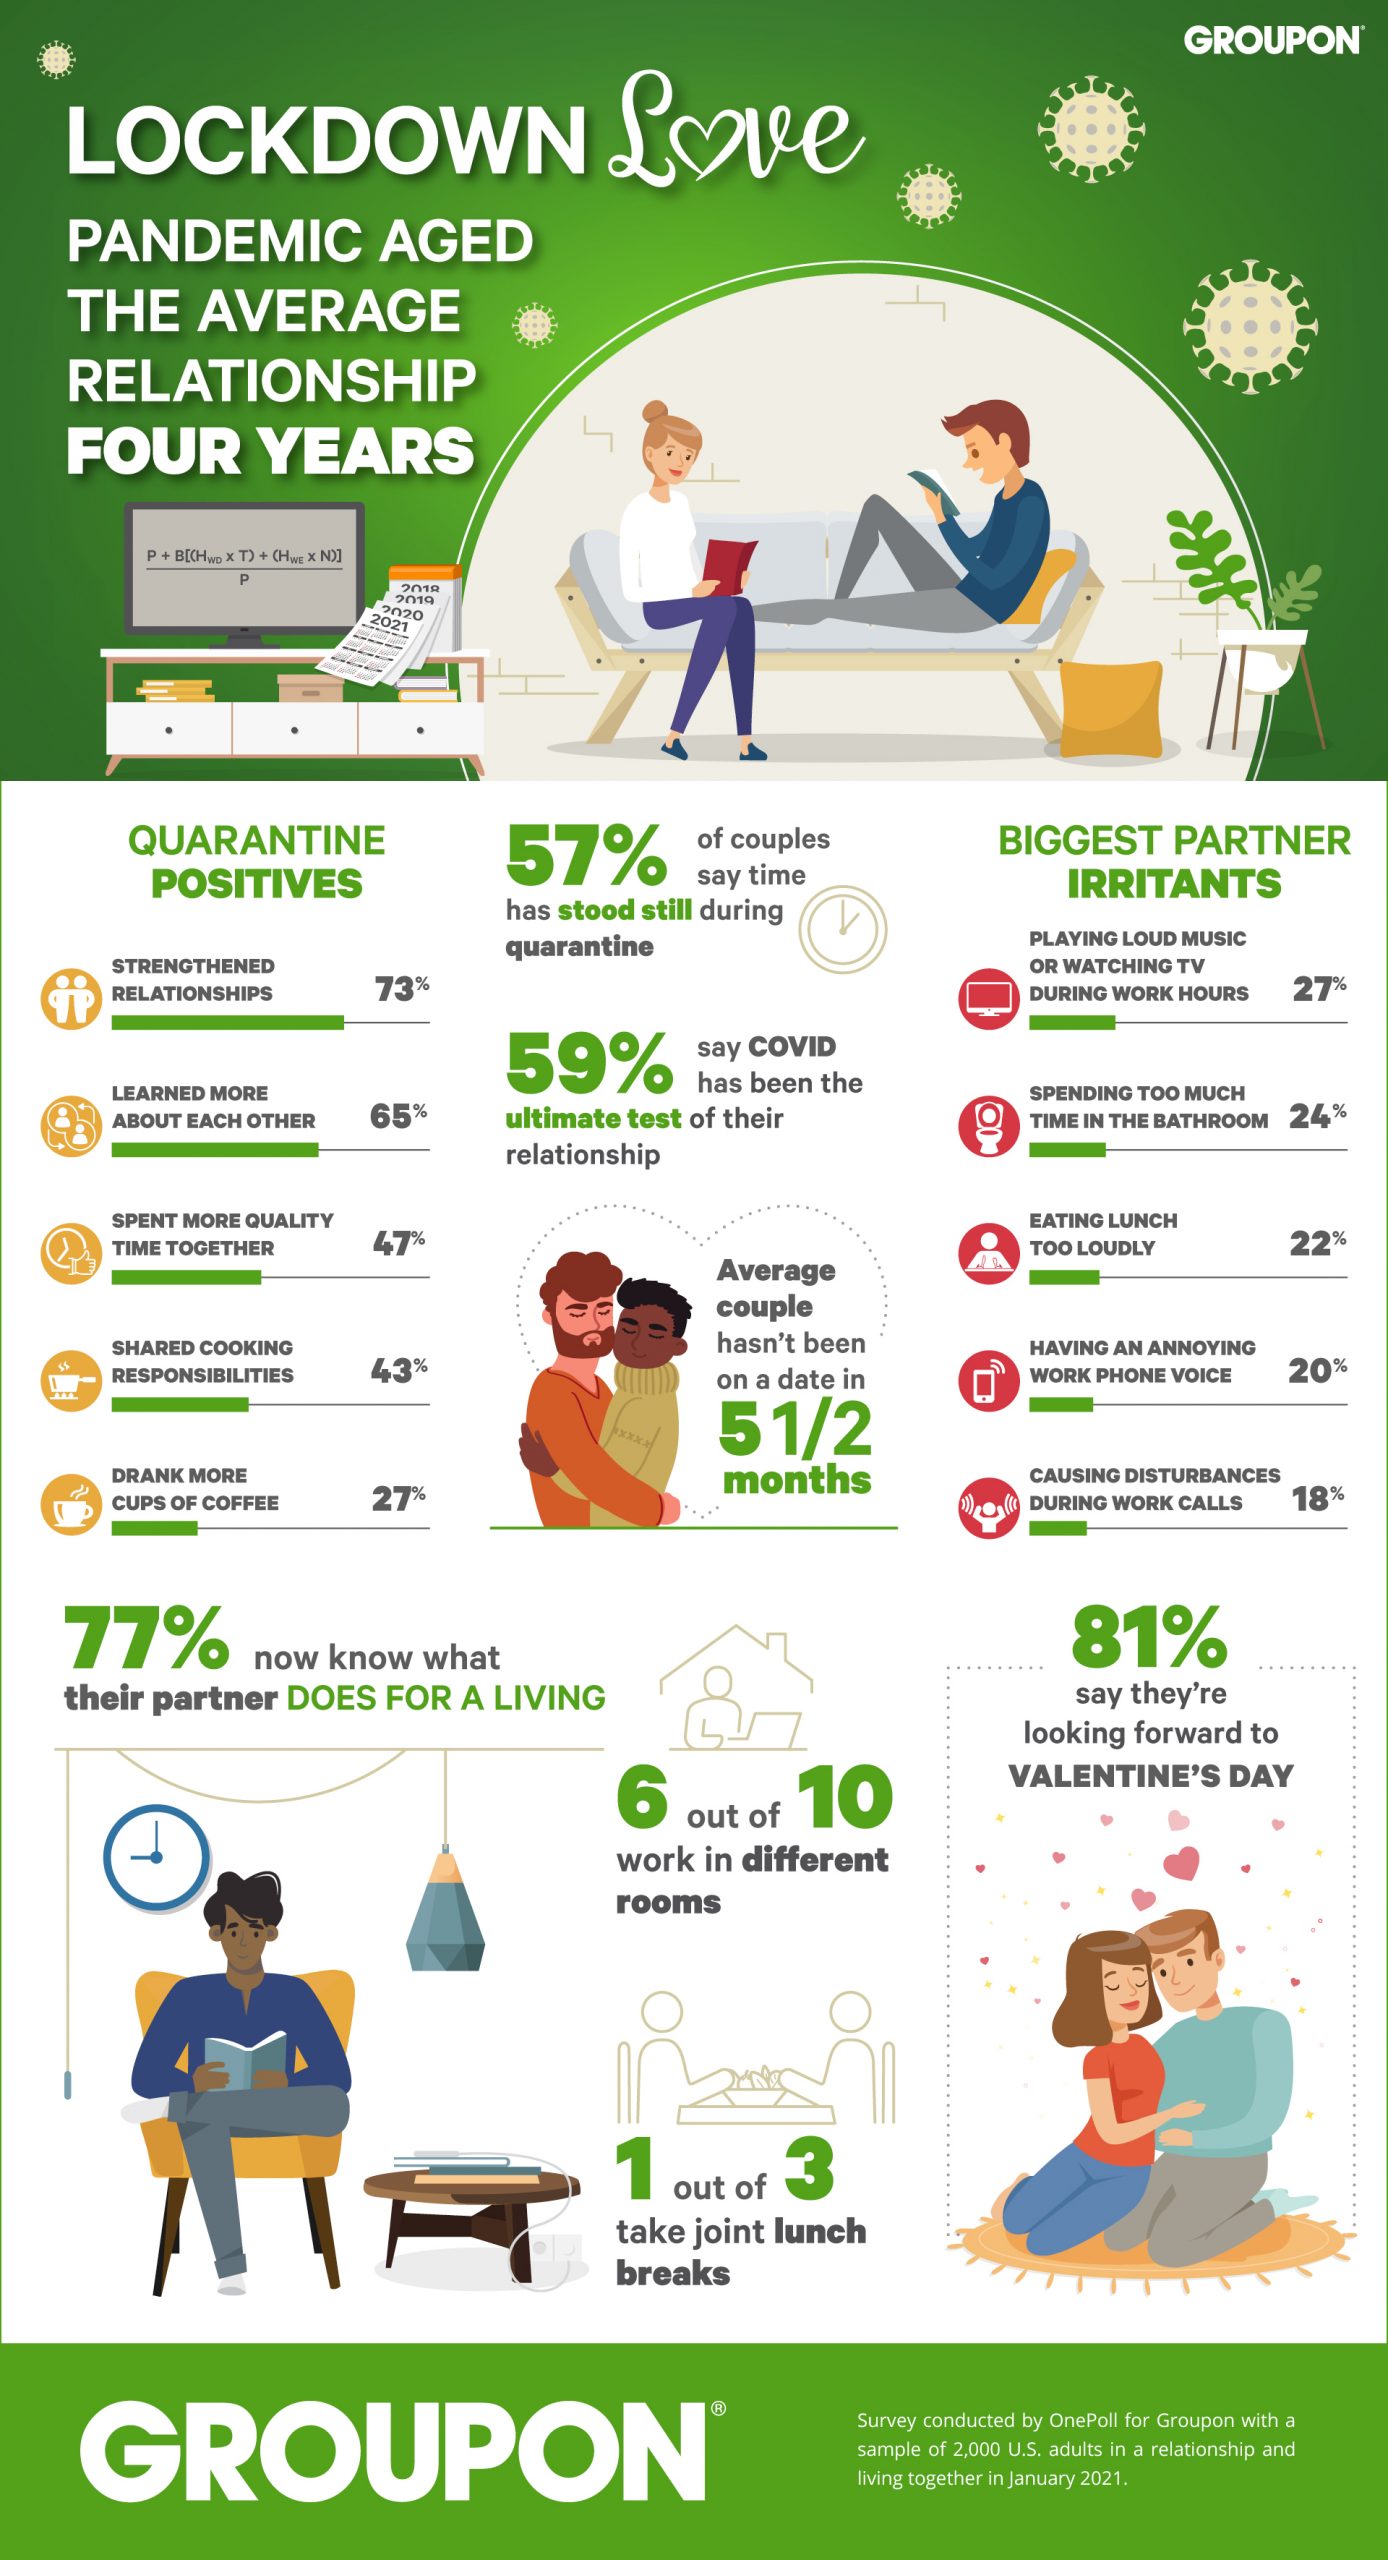 Lockdown-couples-infographic-by-Groupon-for-Valentines-day